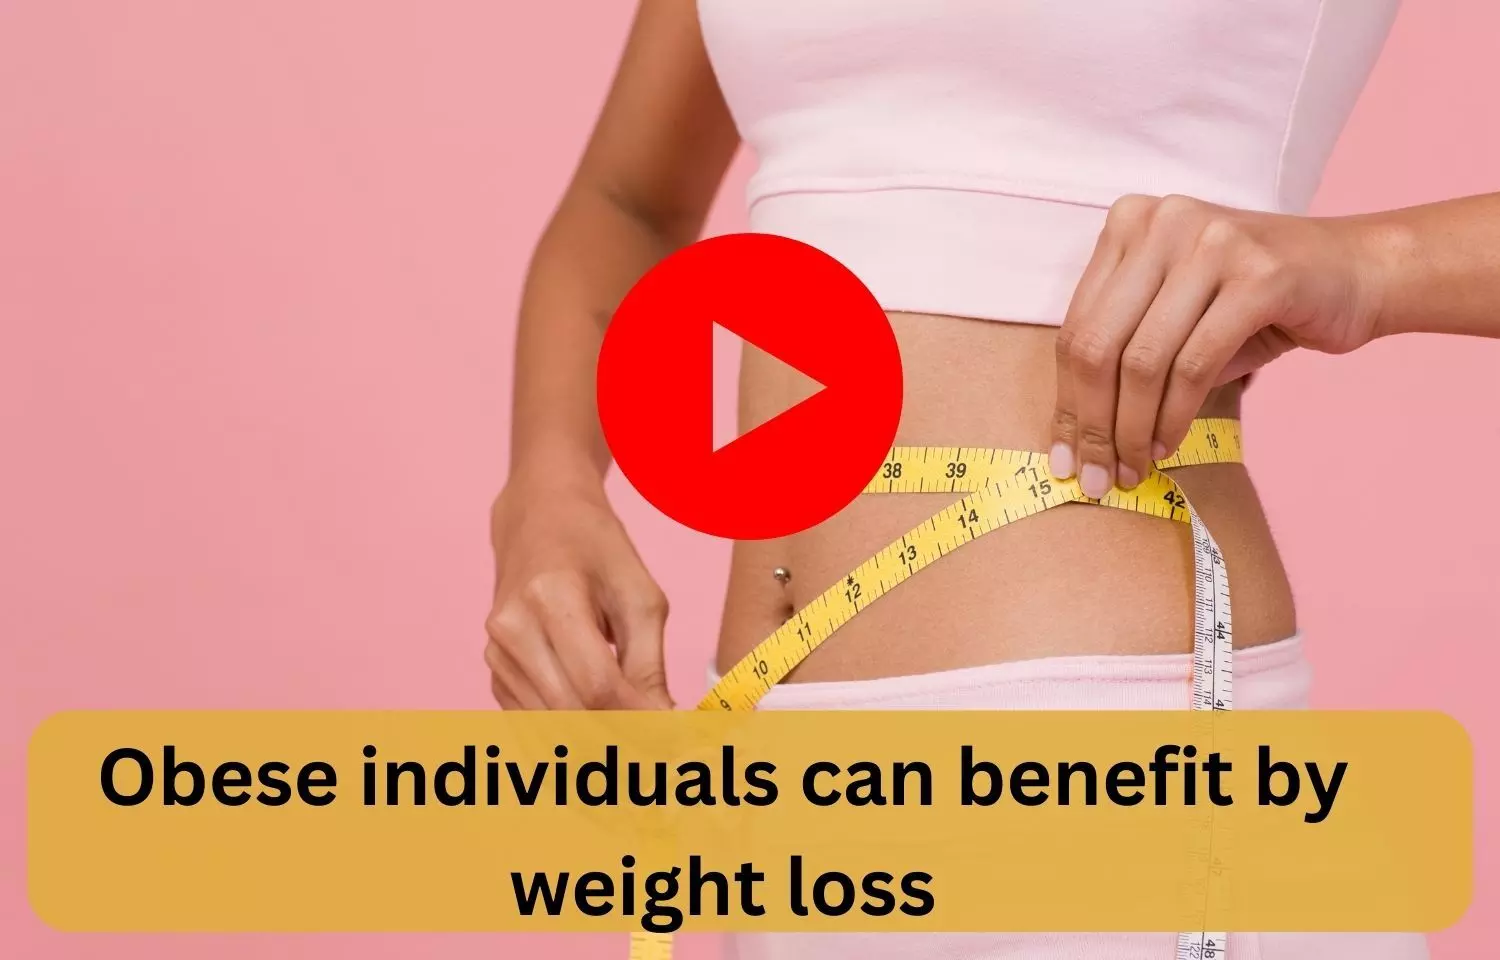 Obese individuals can benefit by weight loss